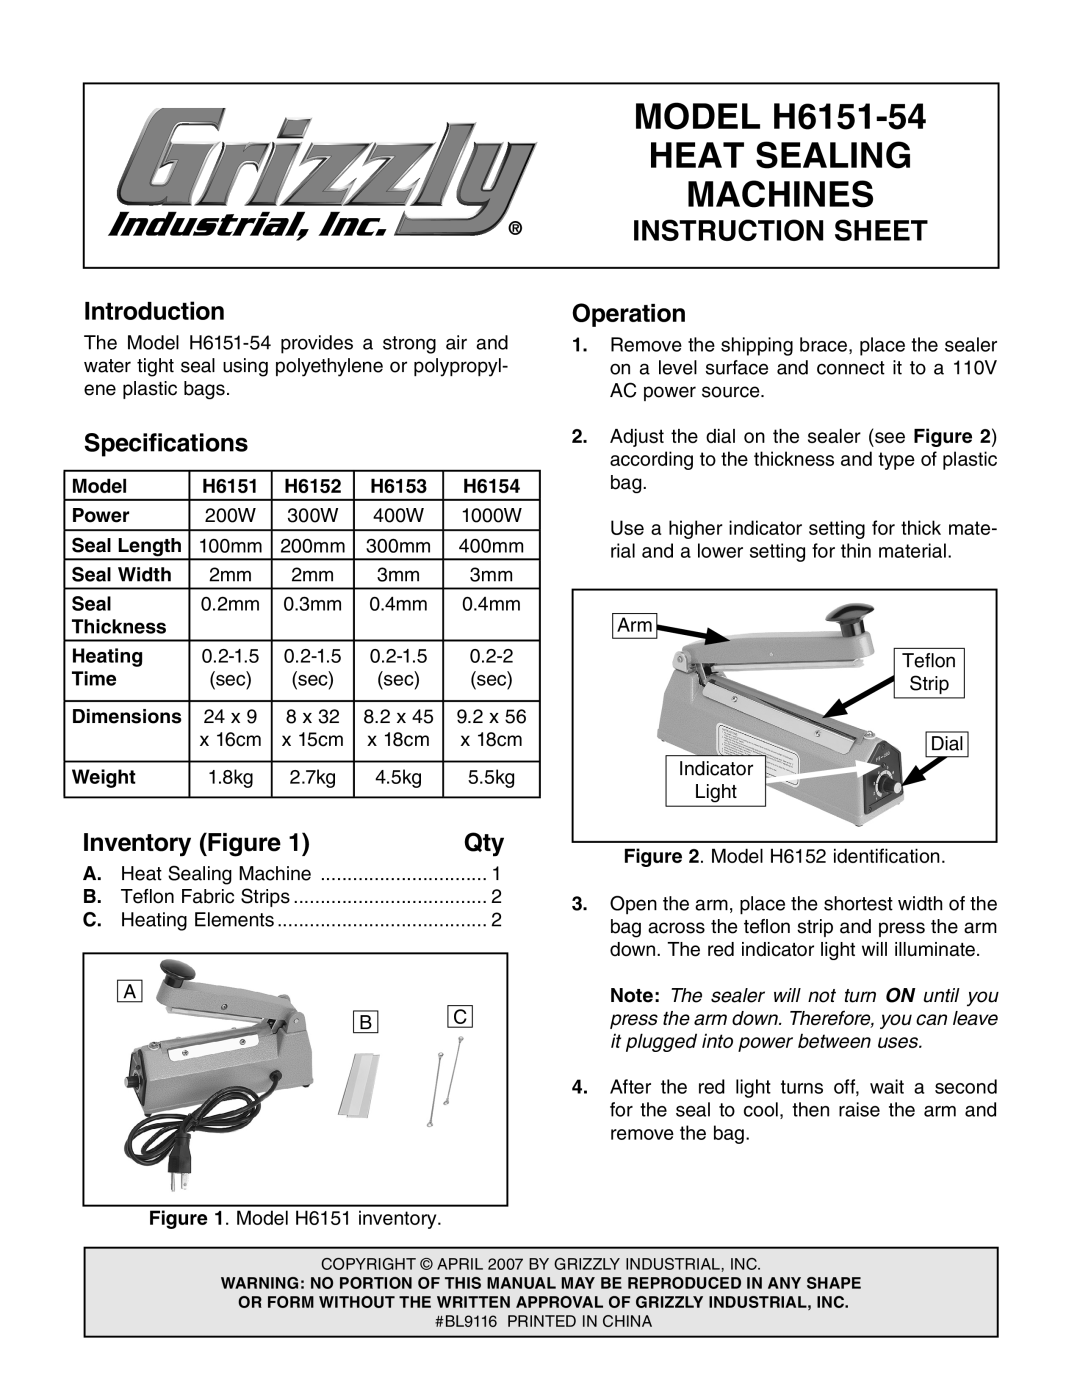 Grizzly specifications Introduction, Operation, Specifications, Inventory Figure, MODEL H6151-54, Heat Sealing, Model 